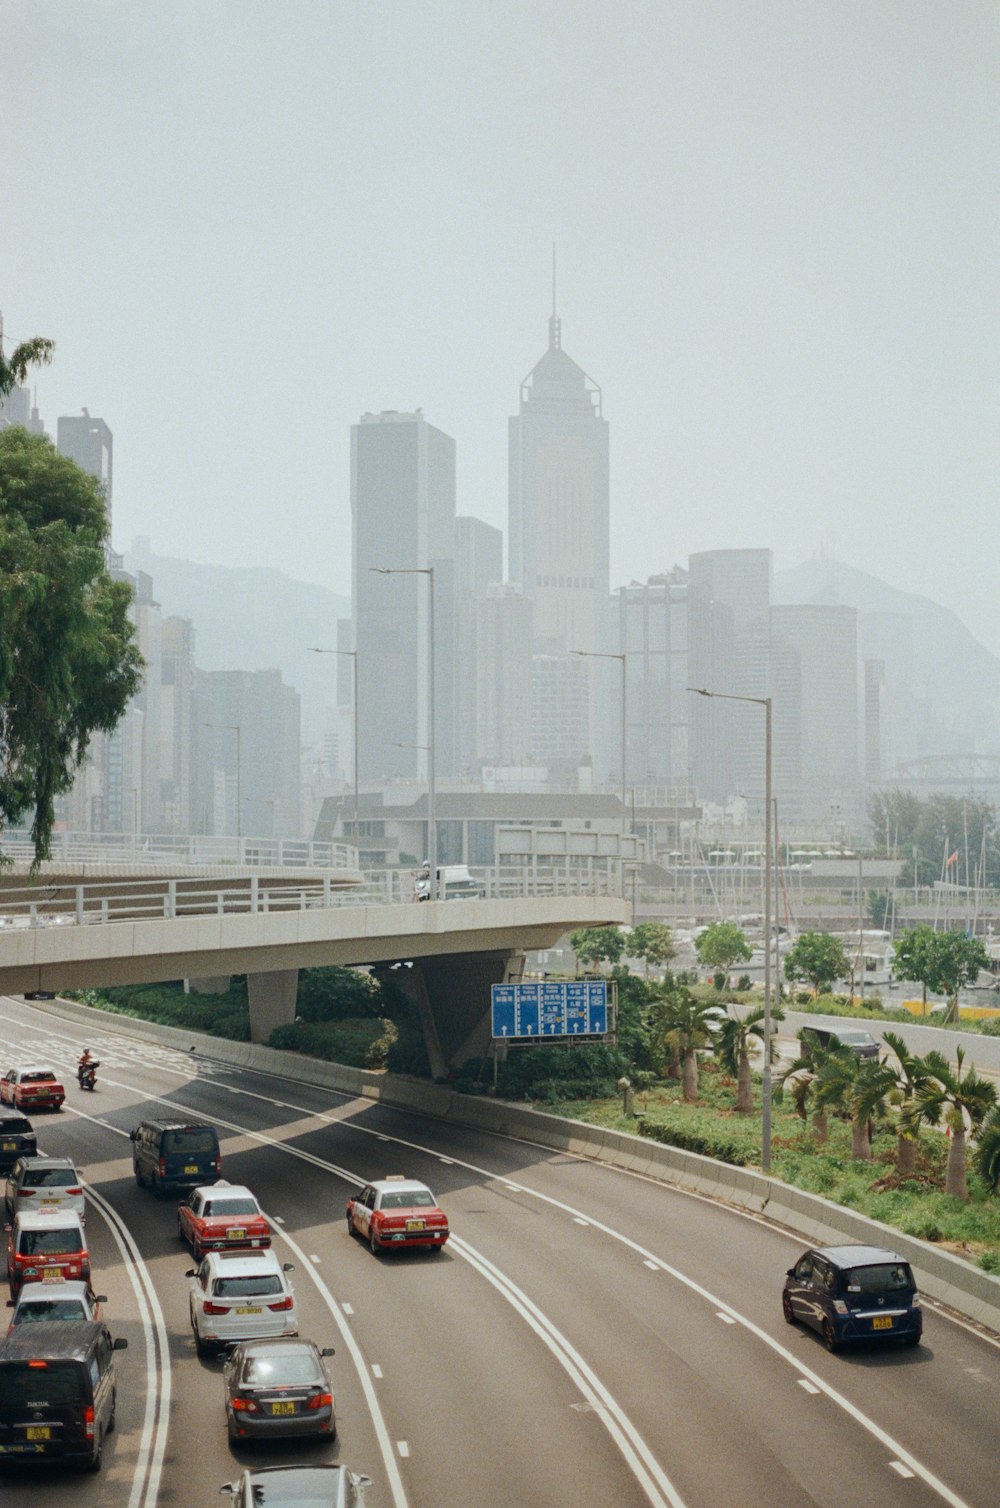 a freeway with cars on it and a city in the background